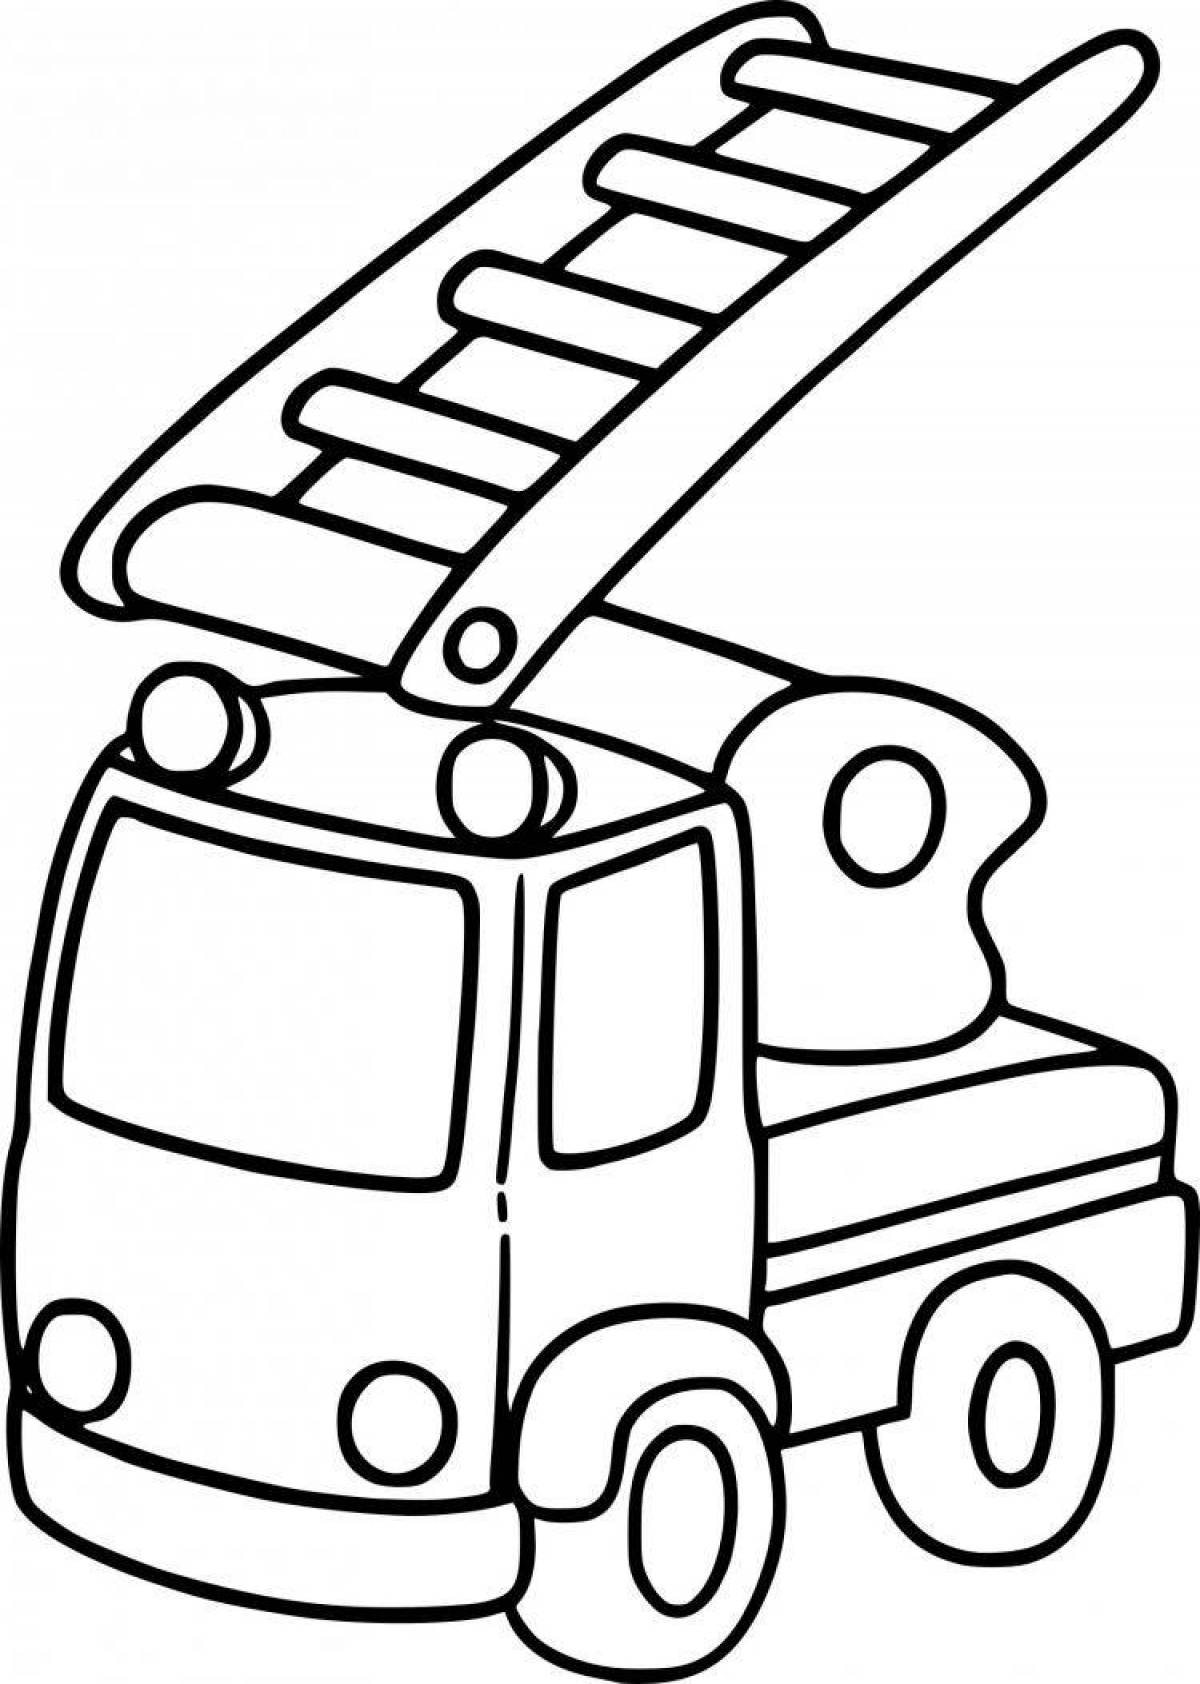 Coloring page attractive car assistant